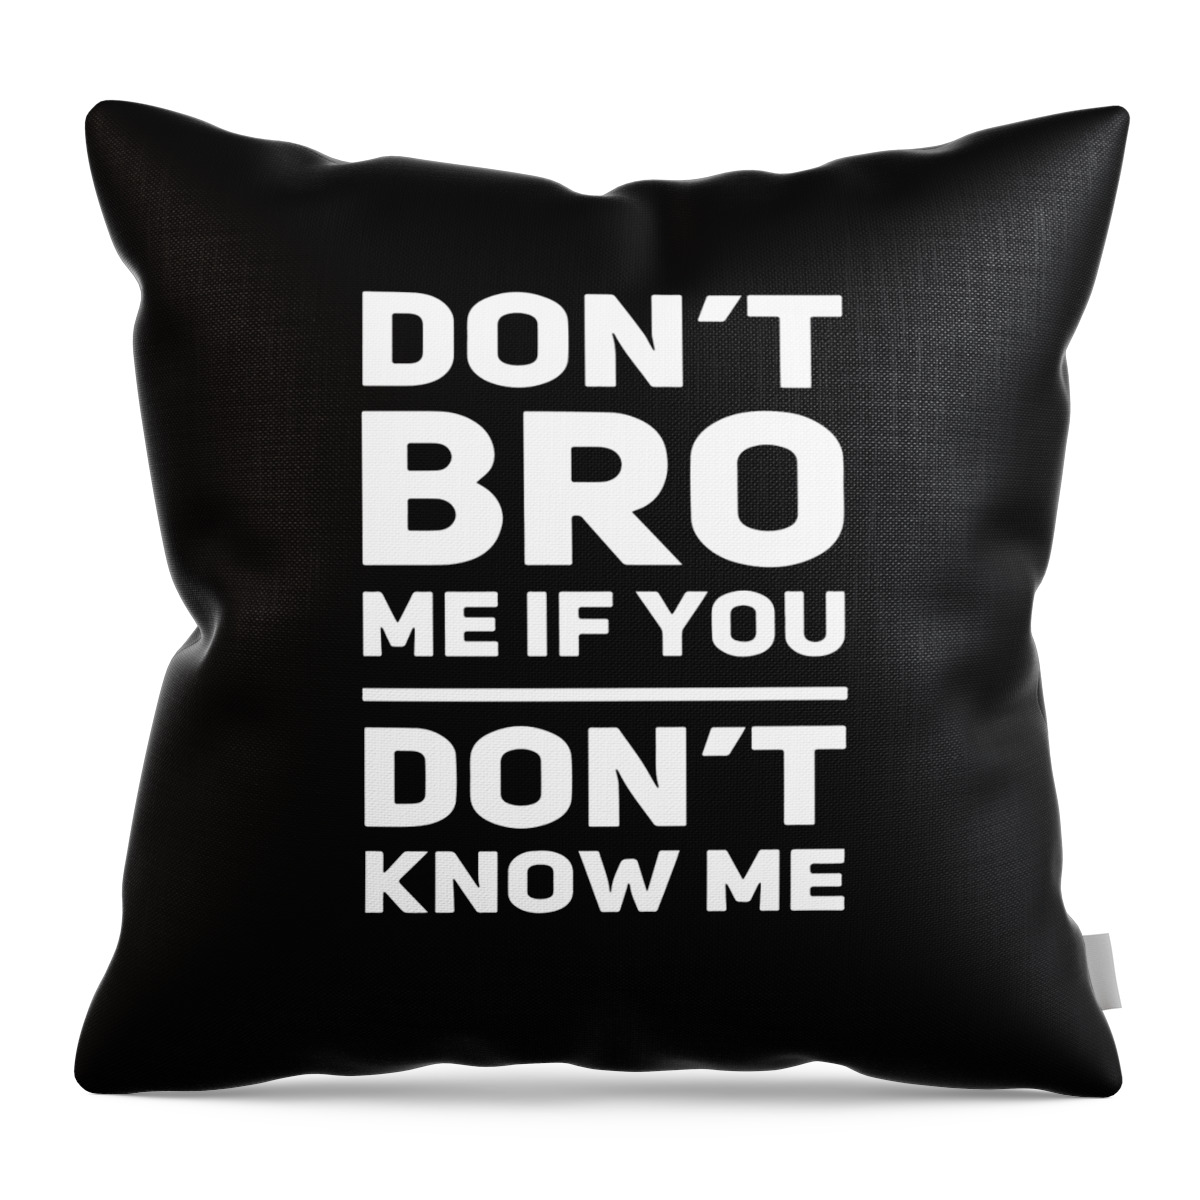 Bro Throw Pillow featuring the digital art Dont Bro Me If You Dont Know Me by Sarcastic P